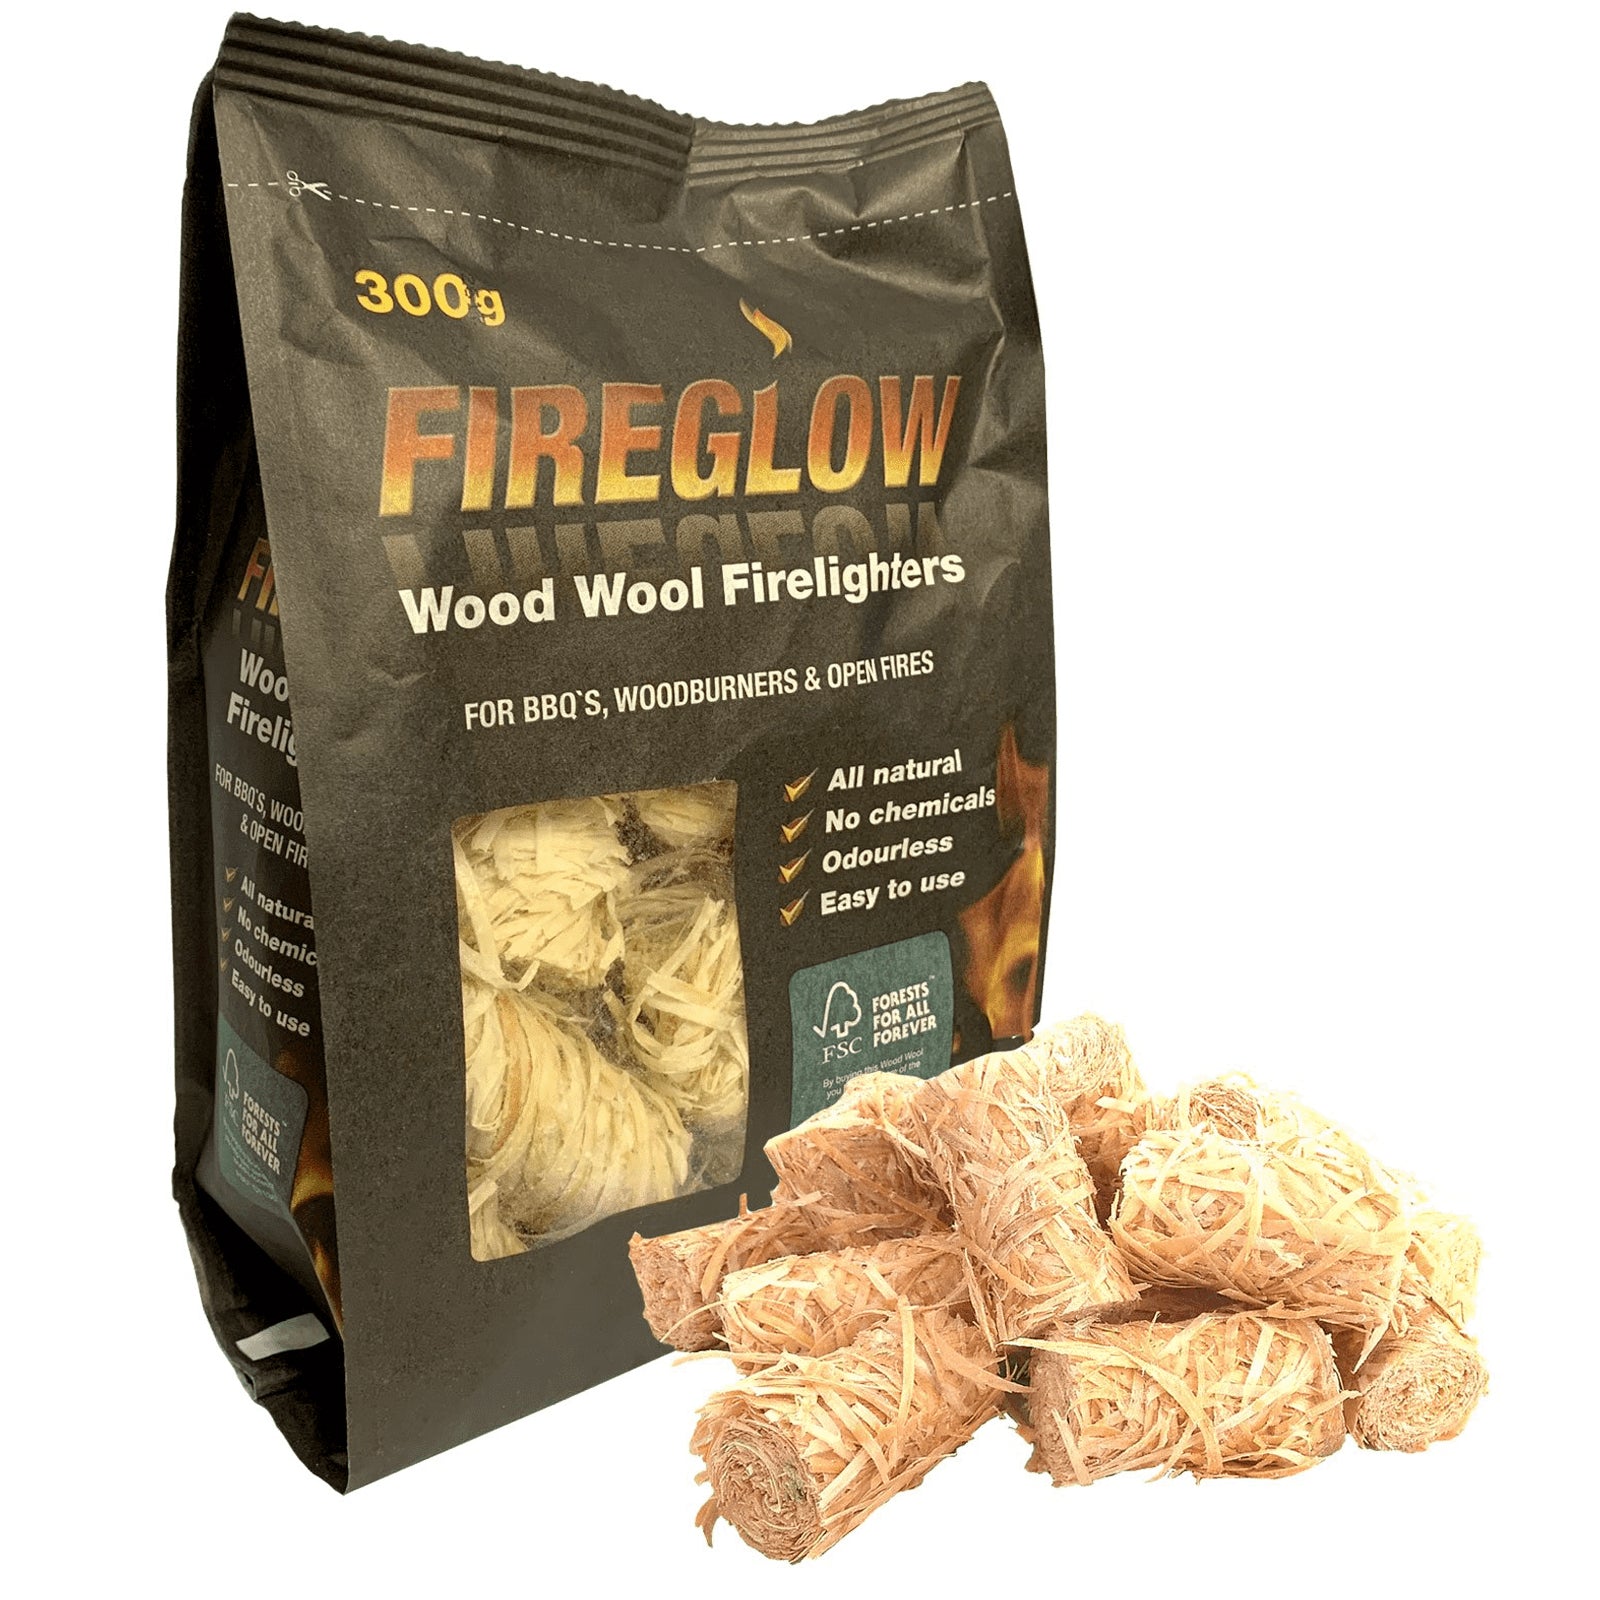 Tiger Tim Fireglow Wood Wool Firelighters 300g – Yorkshire Trading Company